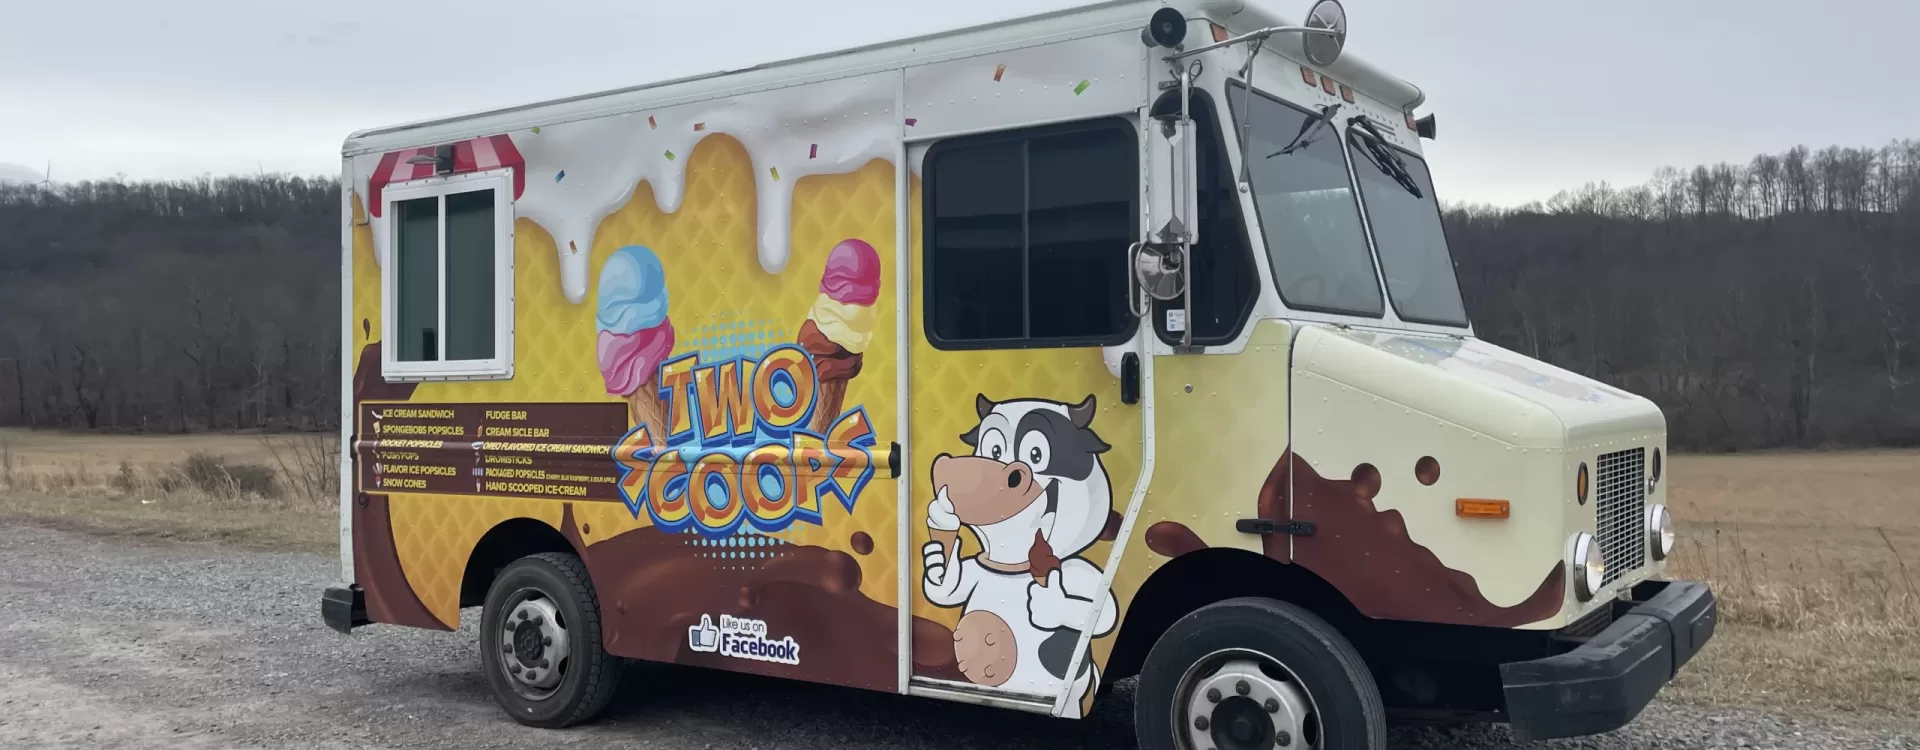 Two Scoops Ice Cream Food Truck